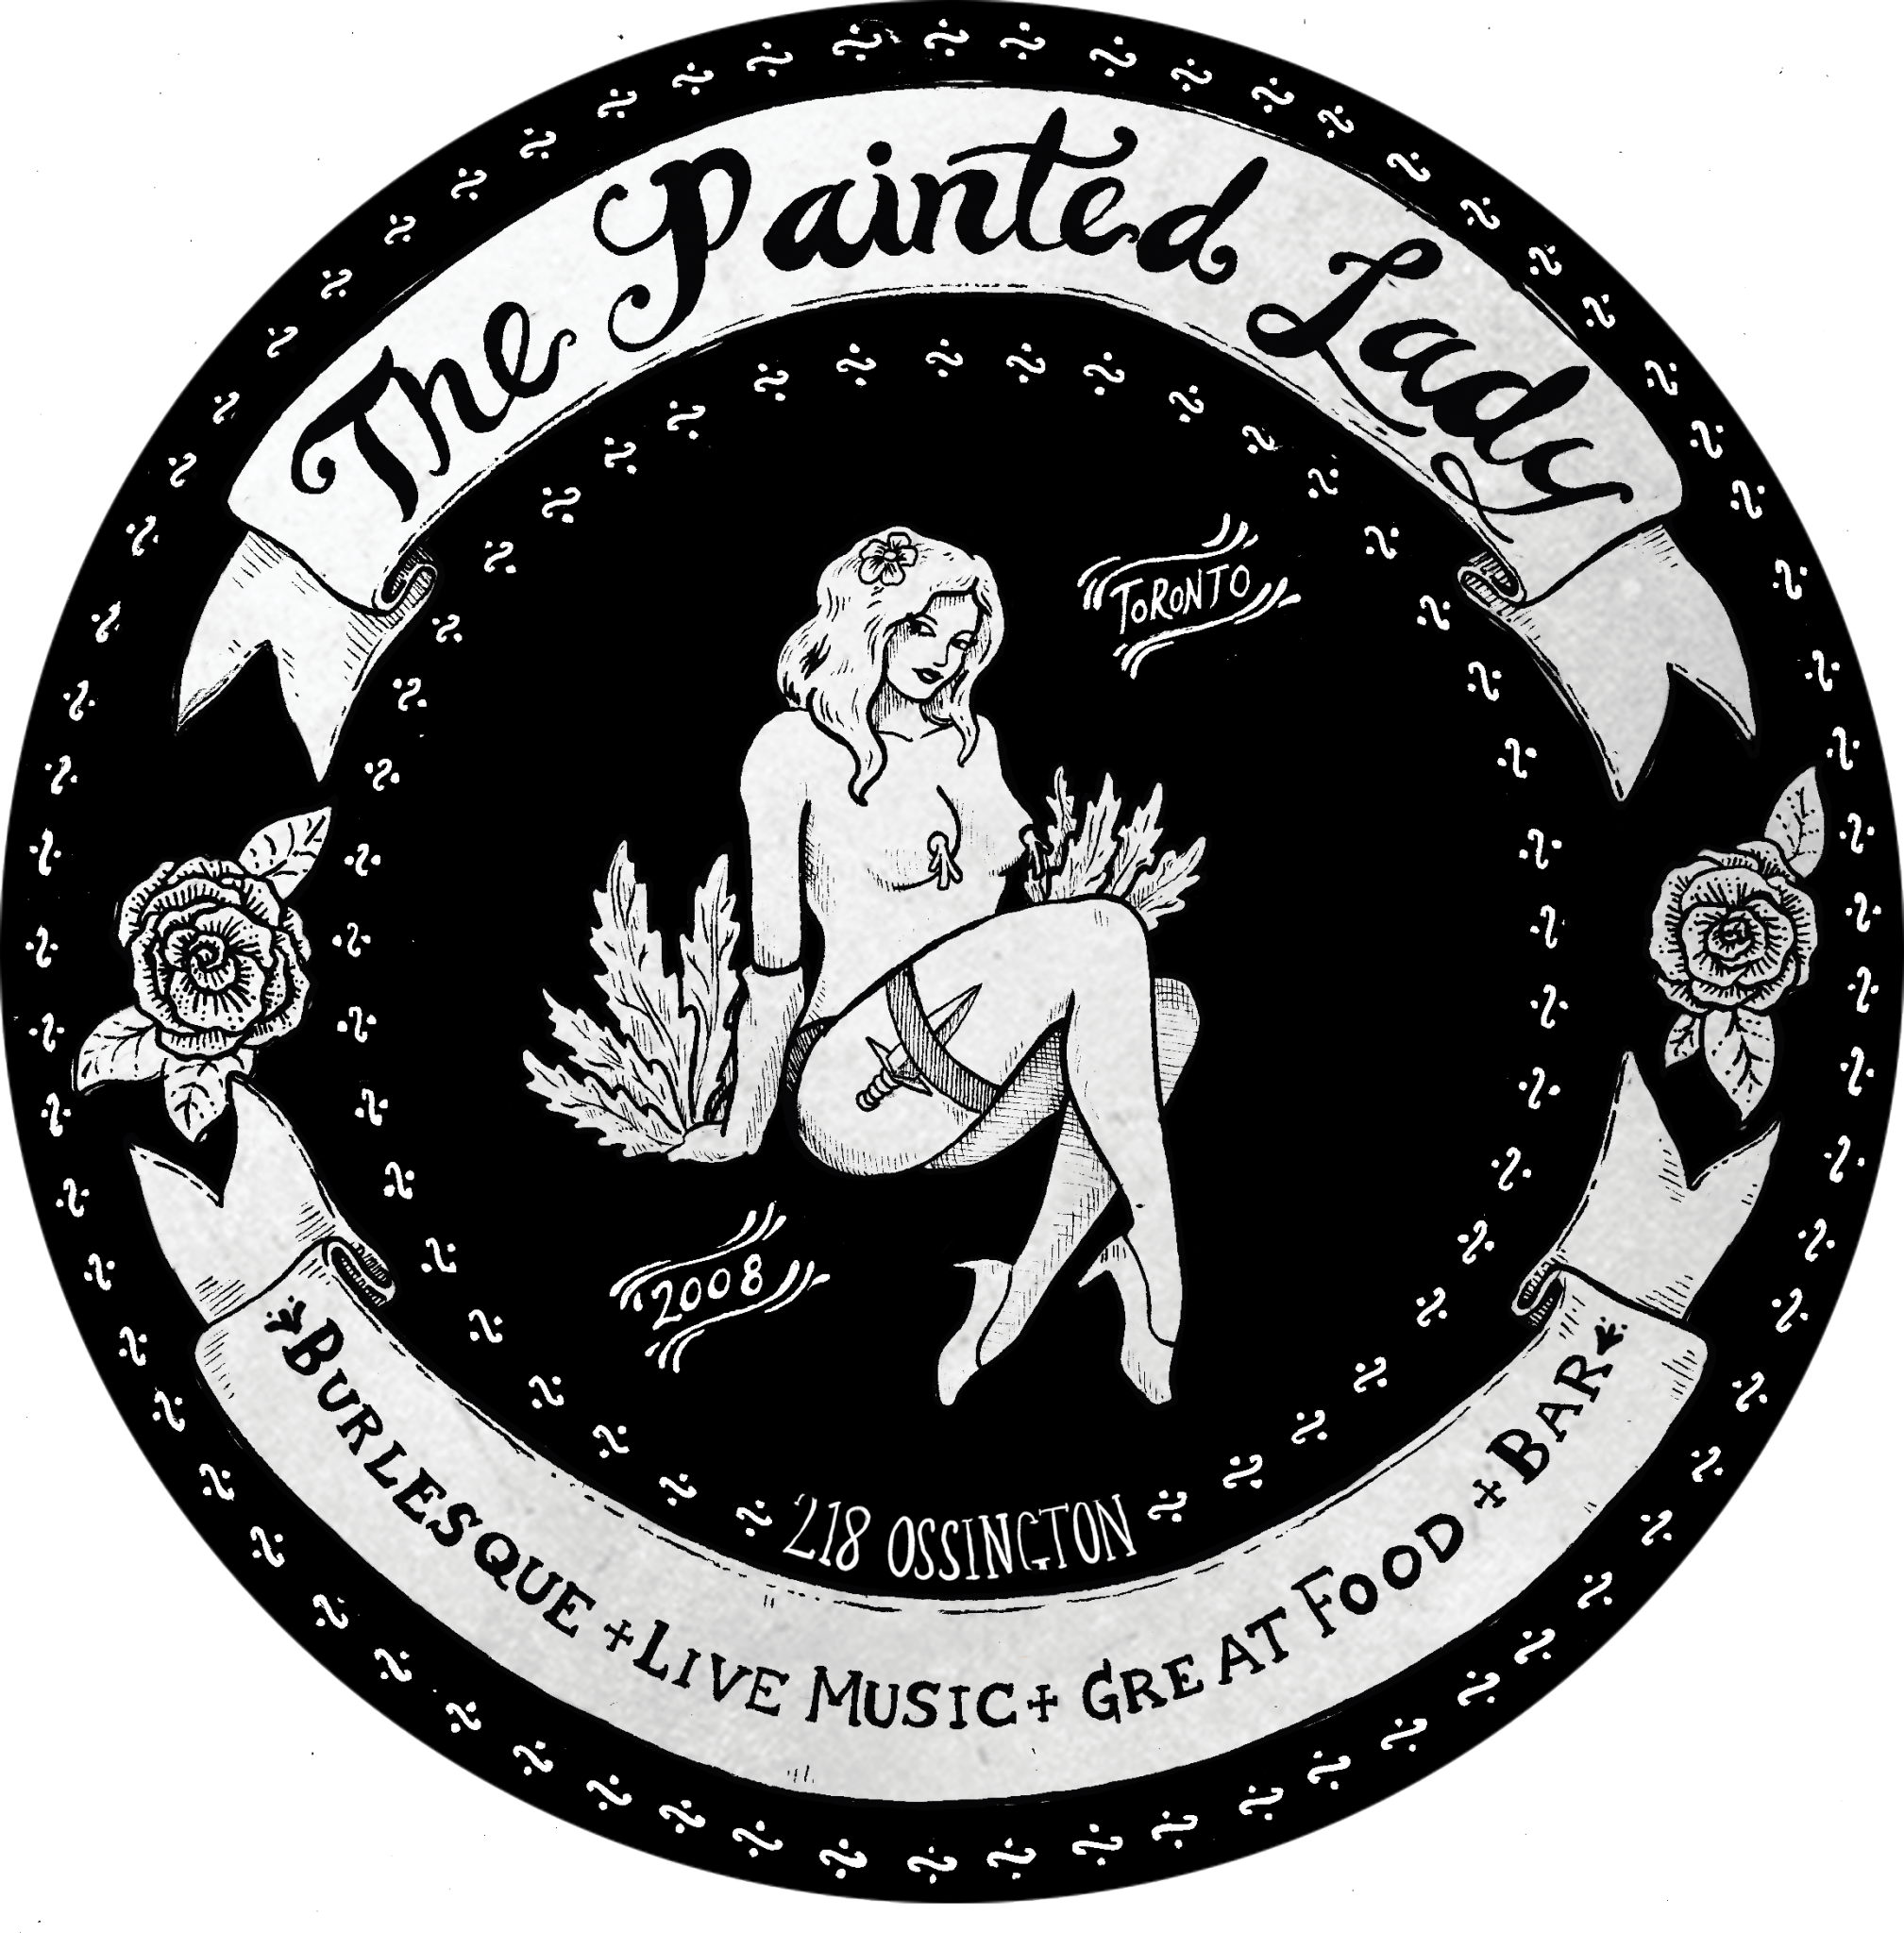 The Painted Lady: Rock'nRoll Funk'n'Soul Burlesque & Absinthe House